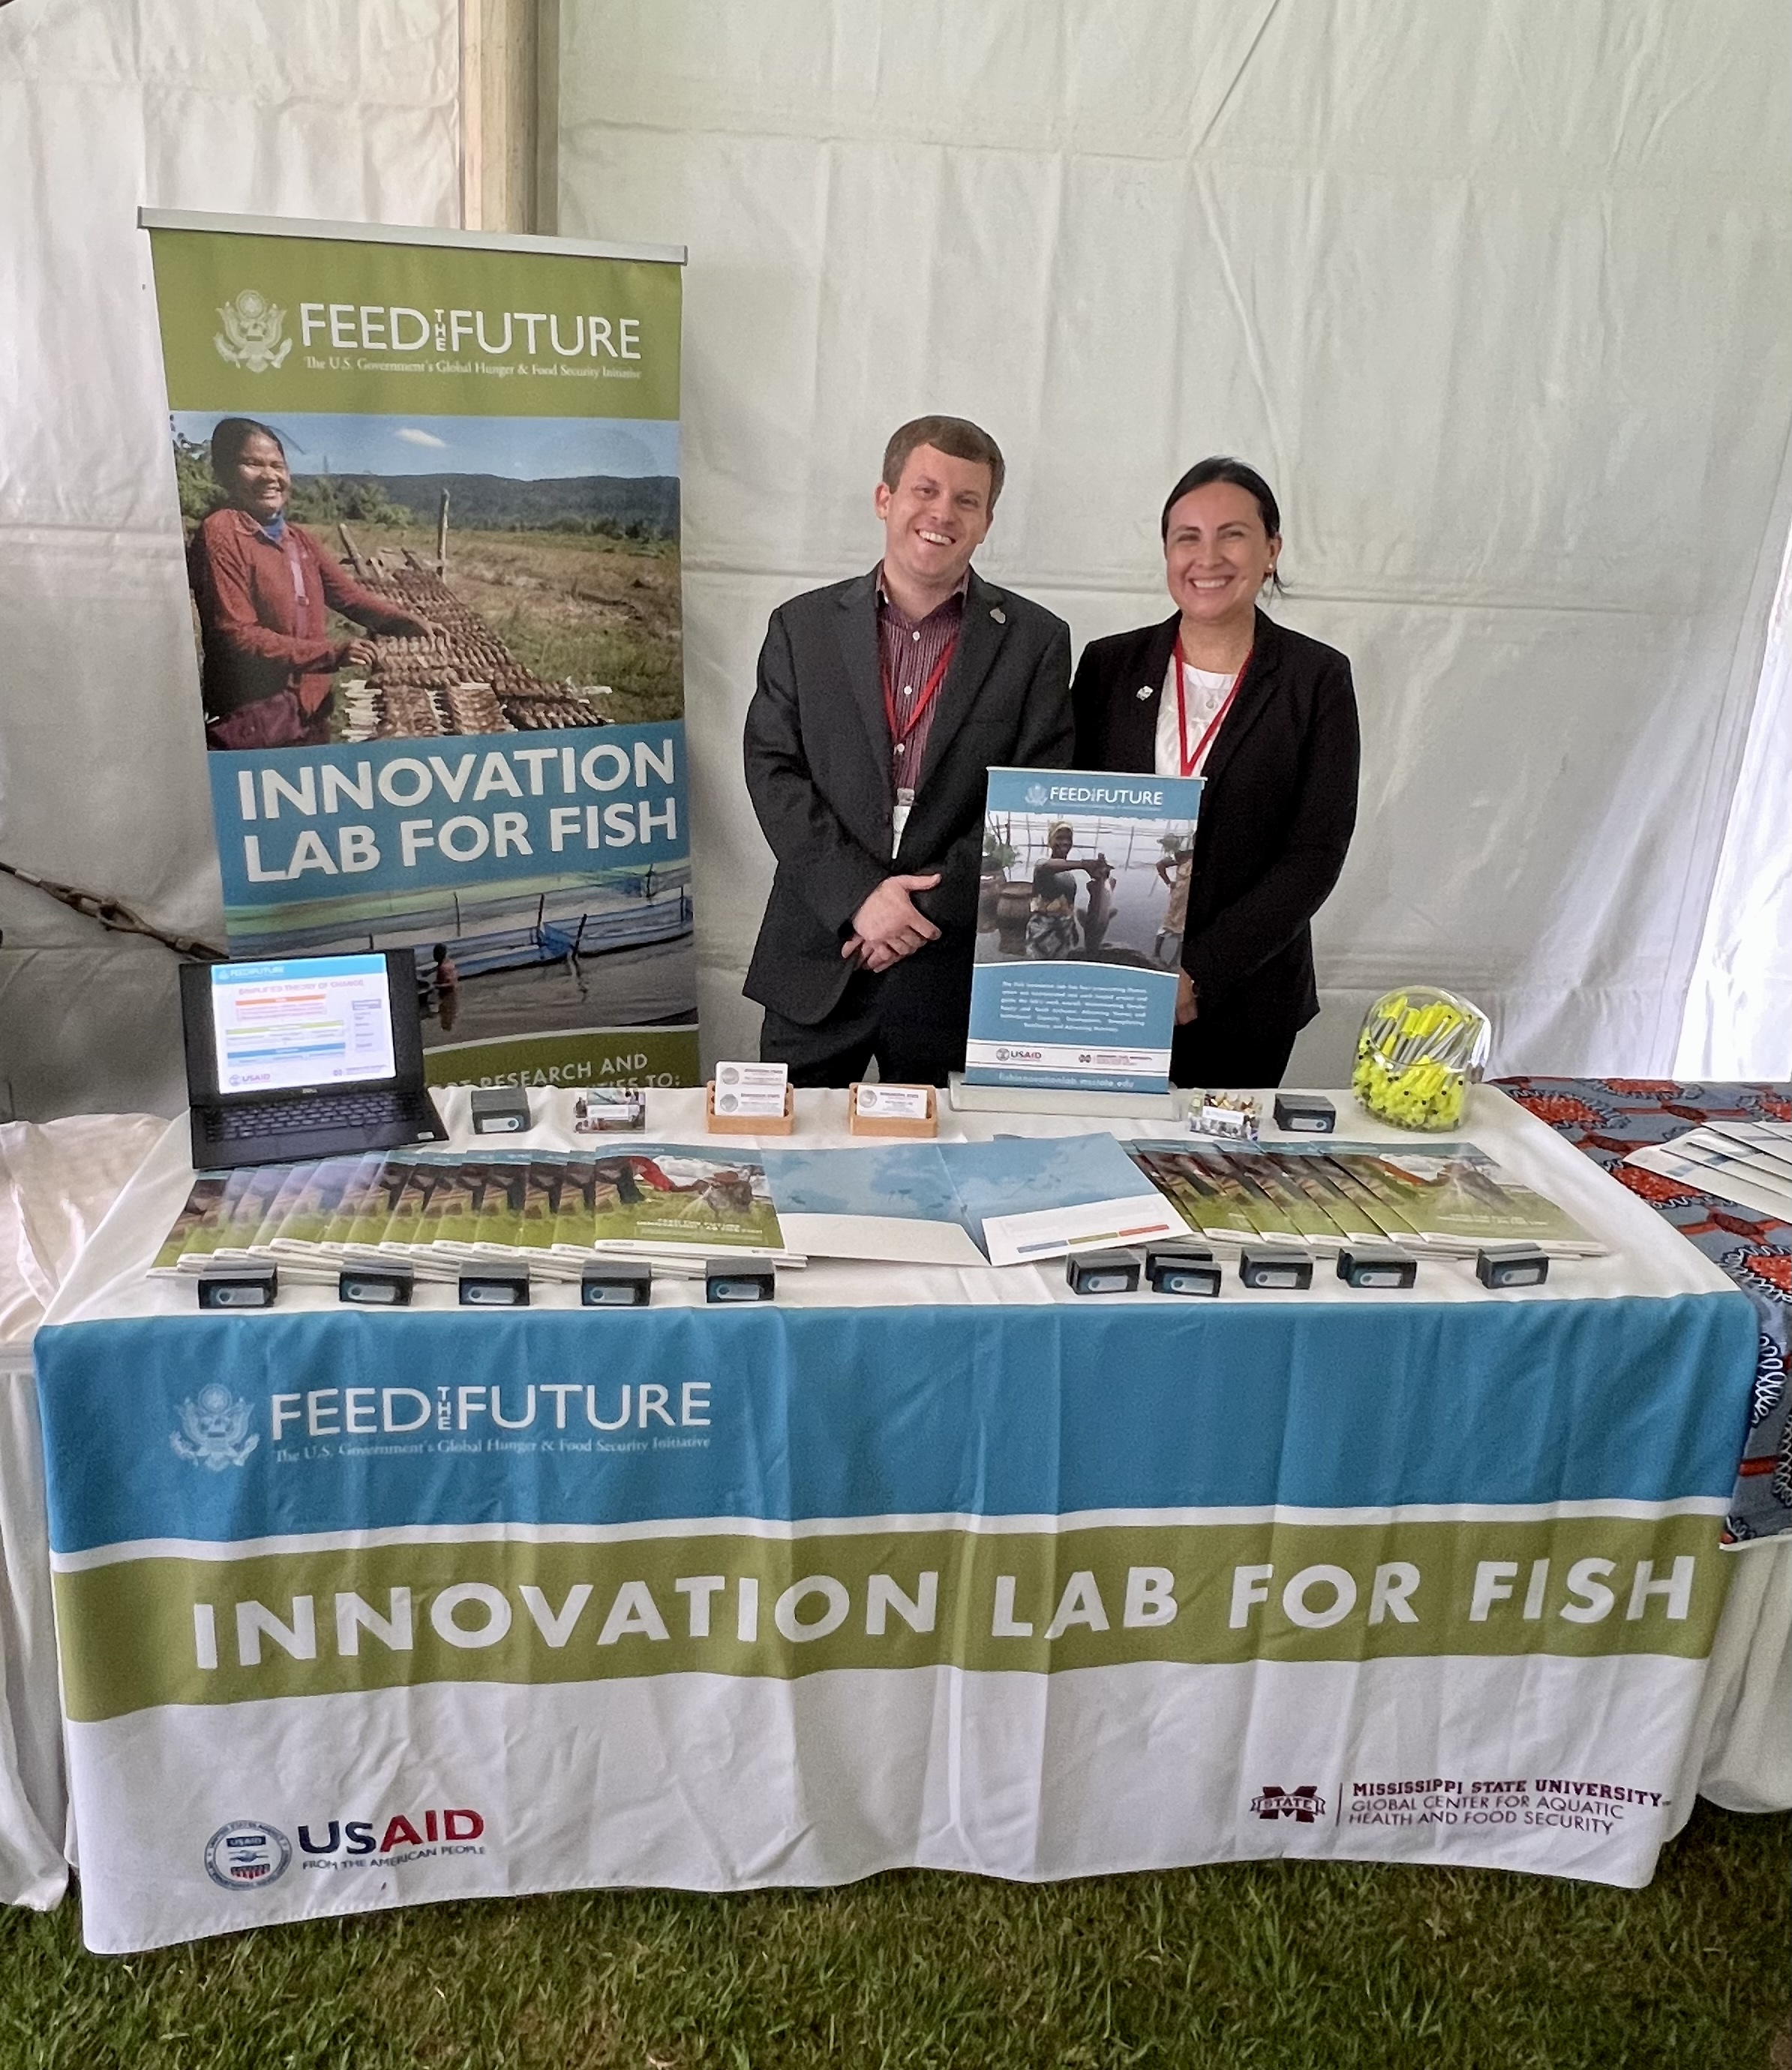 Stephen Reichley and Gina Rico Mendez standing at the Fish Innovation Lab booth